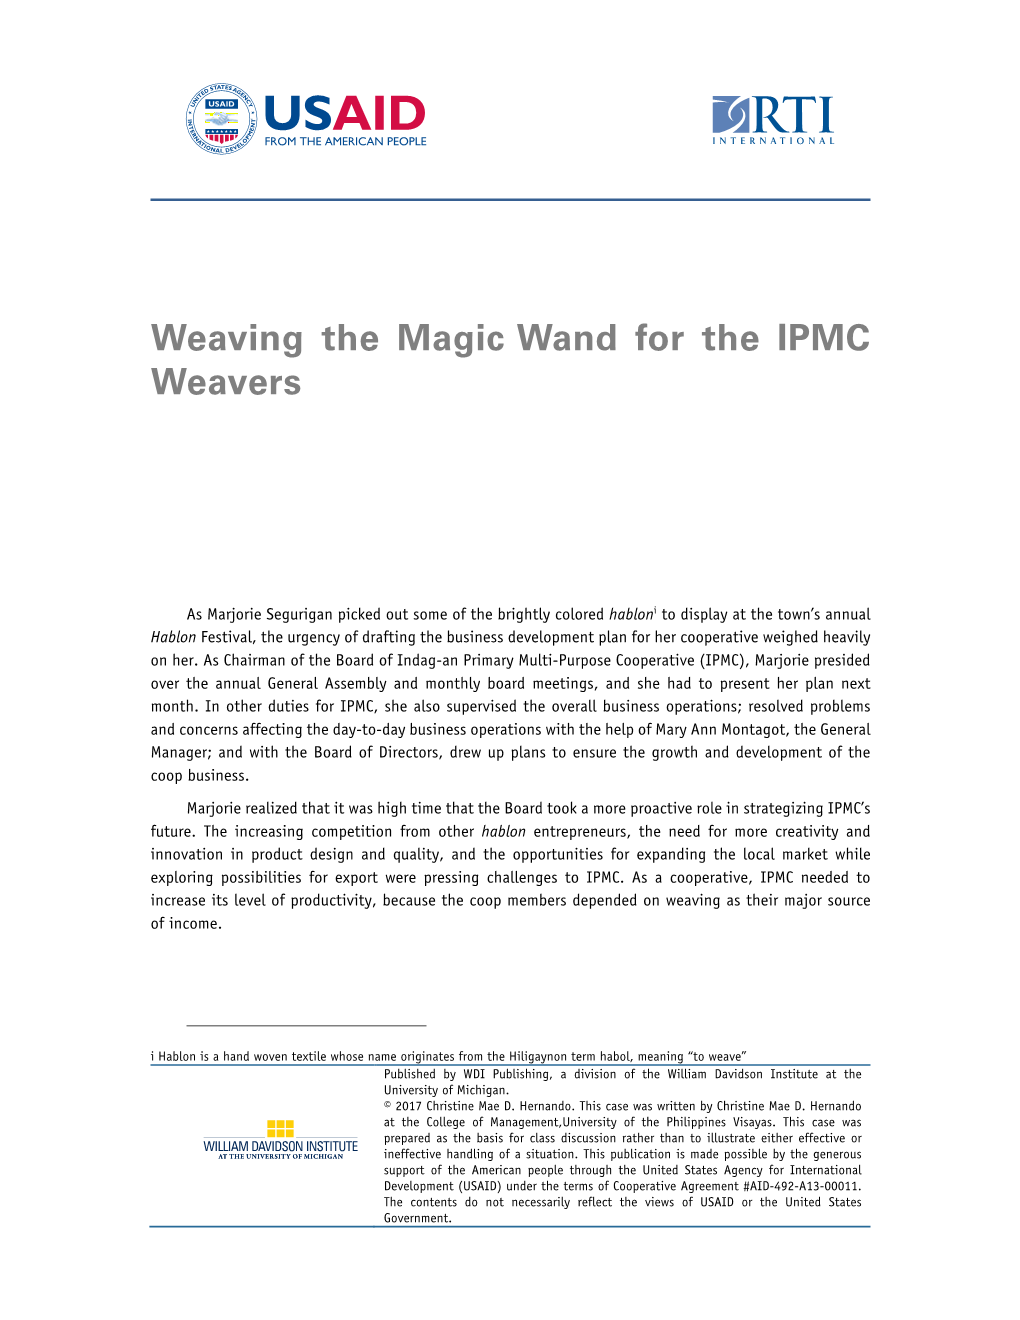 Weaving the Magic Wand for the IPMC Weavers